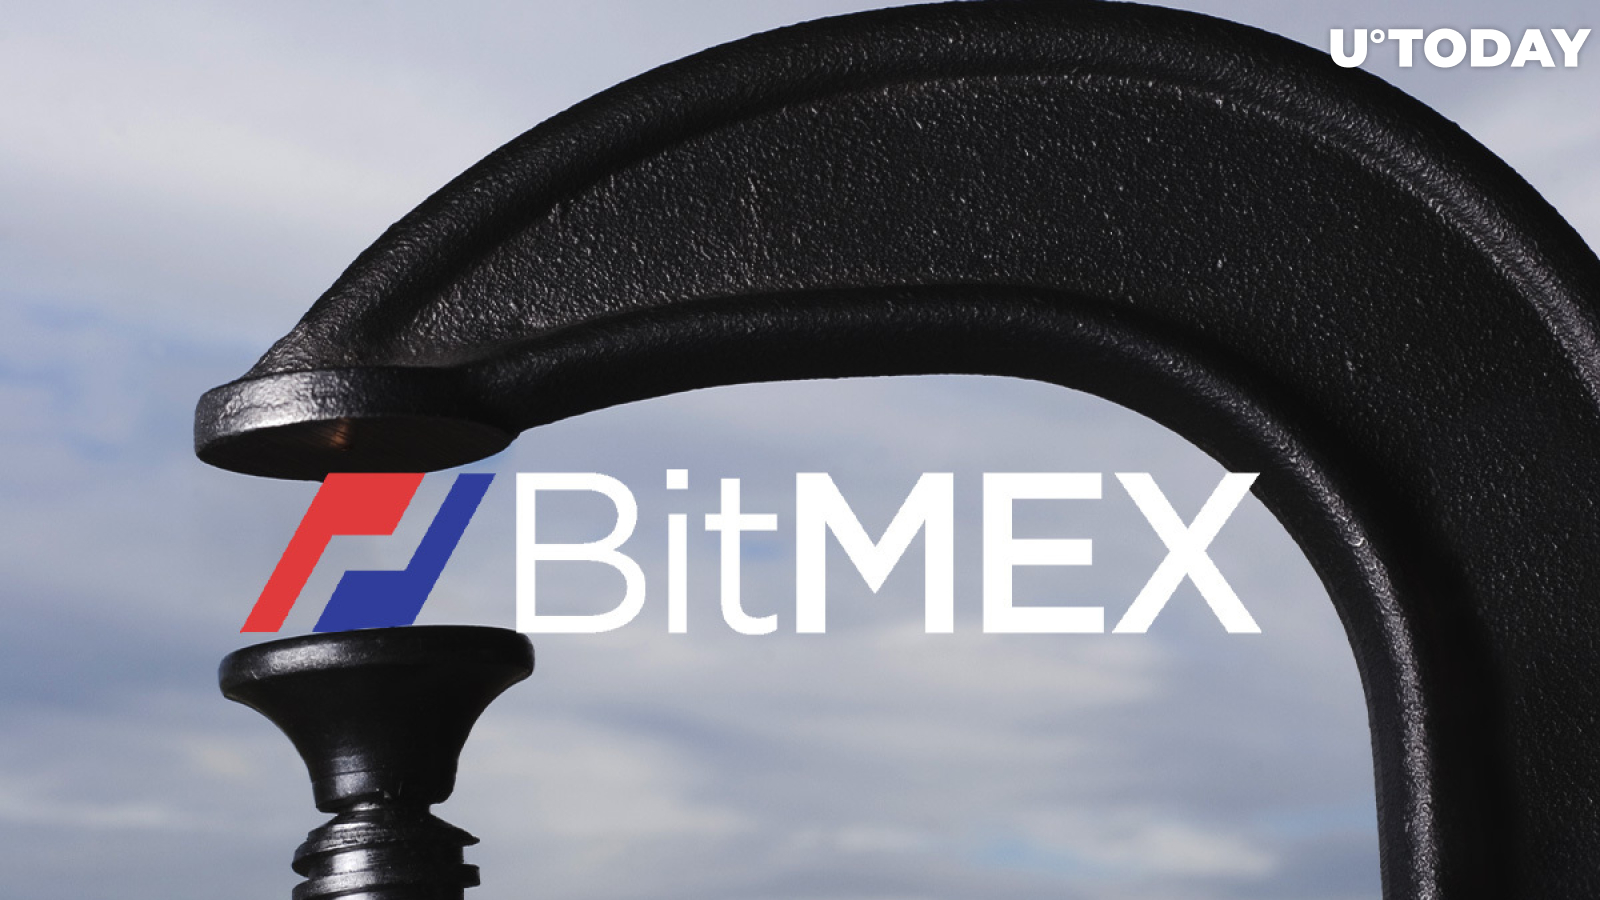 Things Only Getting Worse for BitMEX After CFTC Clampdown